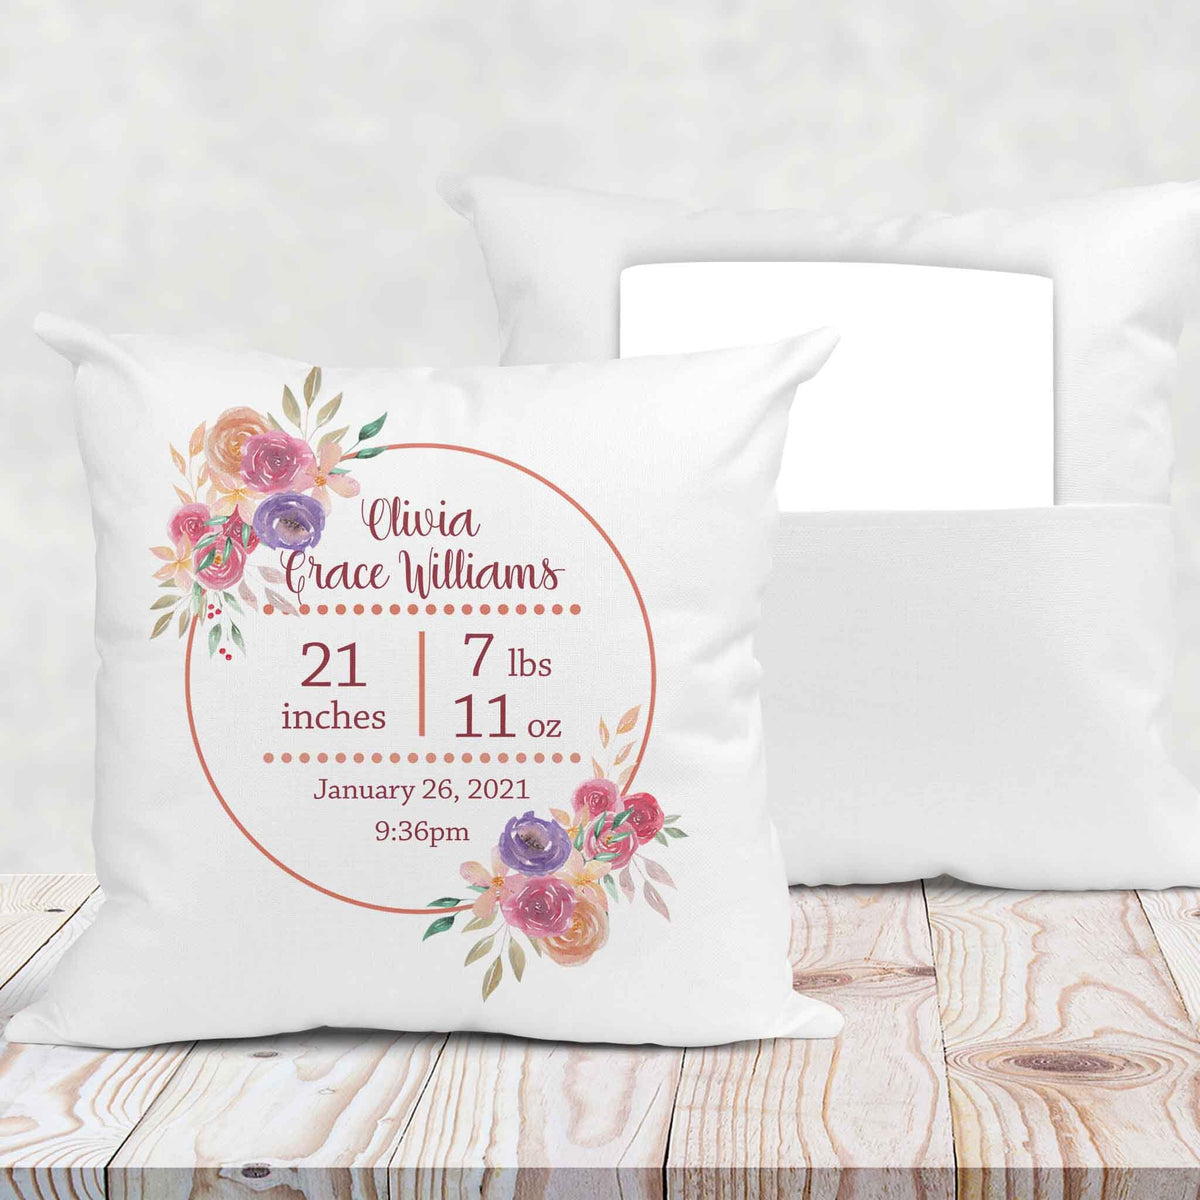 Personalized Throw Pillow | Custom Decorative Pillow | Pink Floral Baby Stats